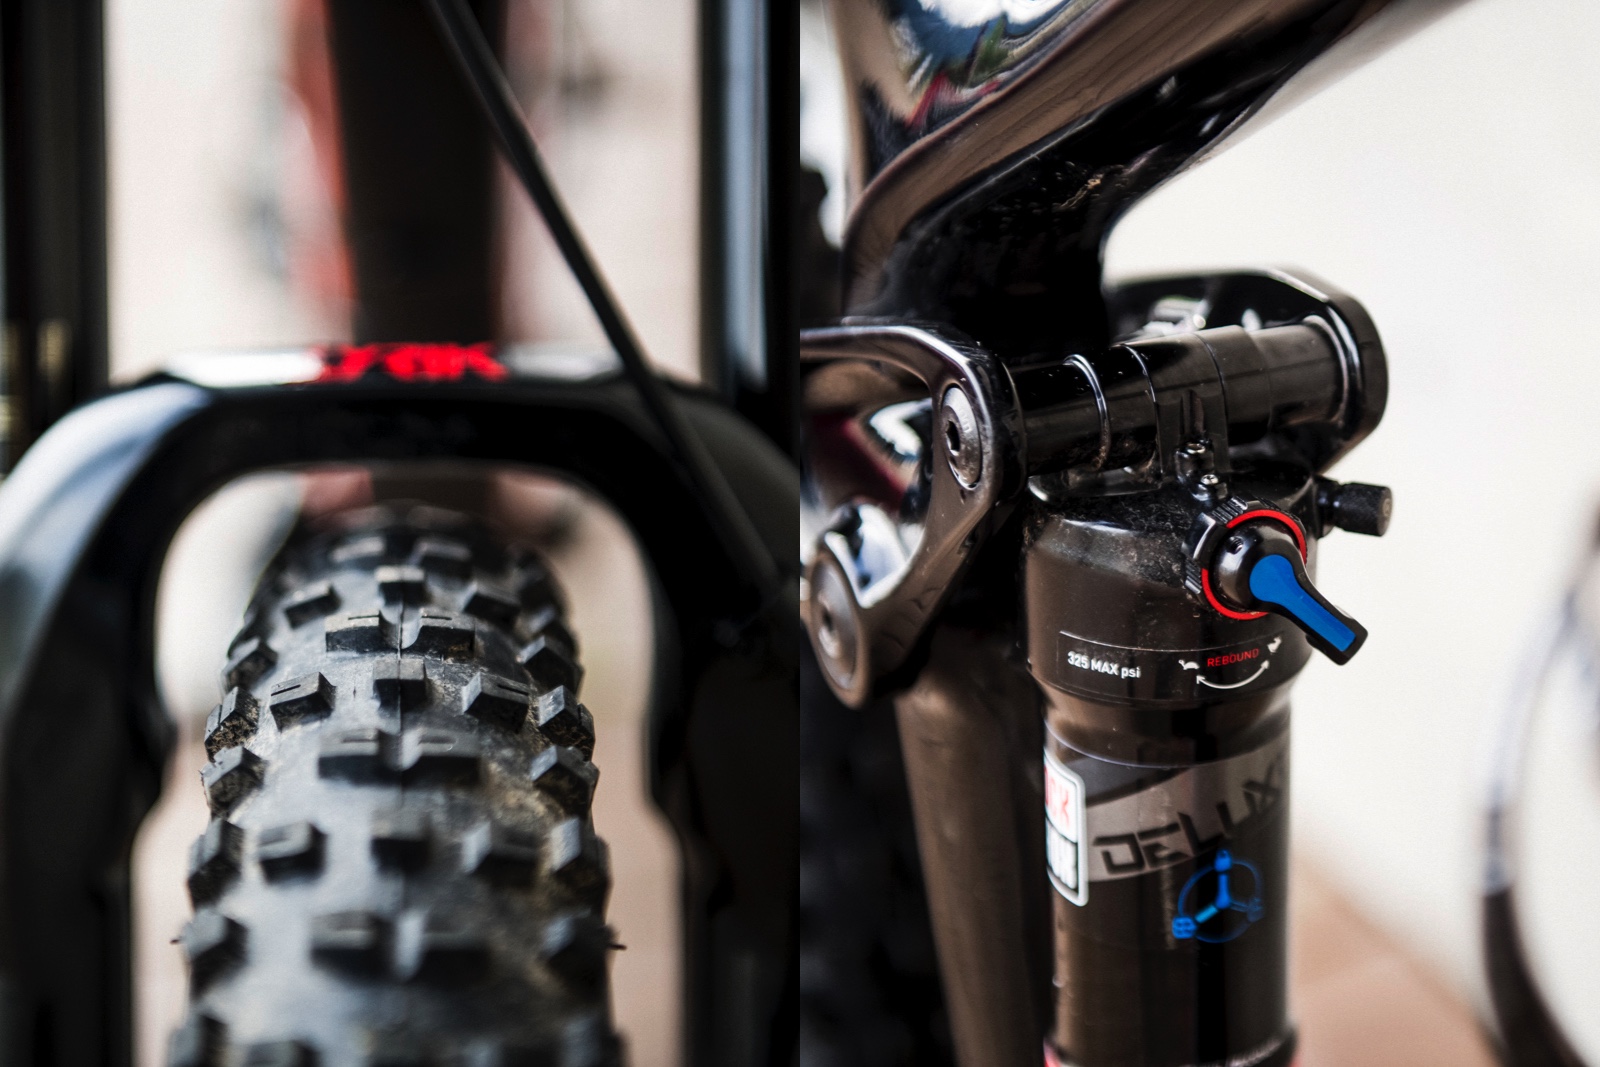 The Remedy is spec'd with RockShox suspension; up front it featured a travel adjust Lyrik with 160mm of travel and out back it had the new metric sized, high volume RockShox Deluxe.